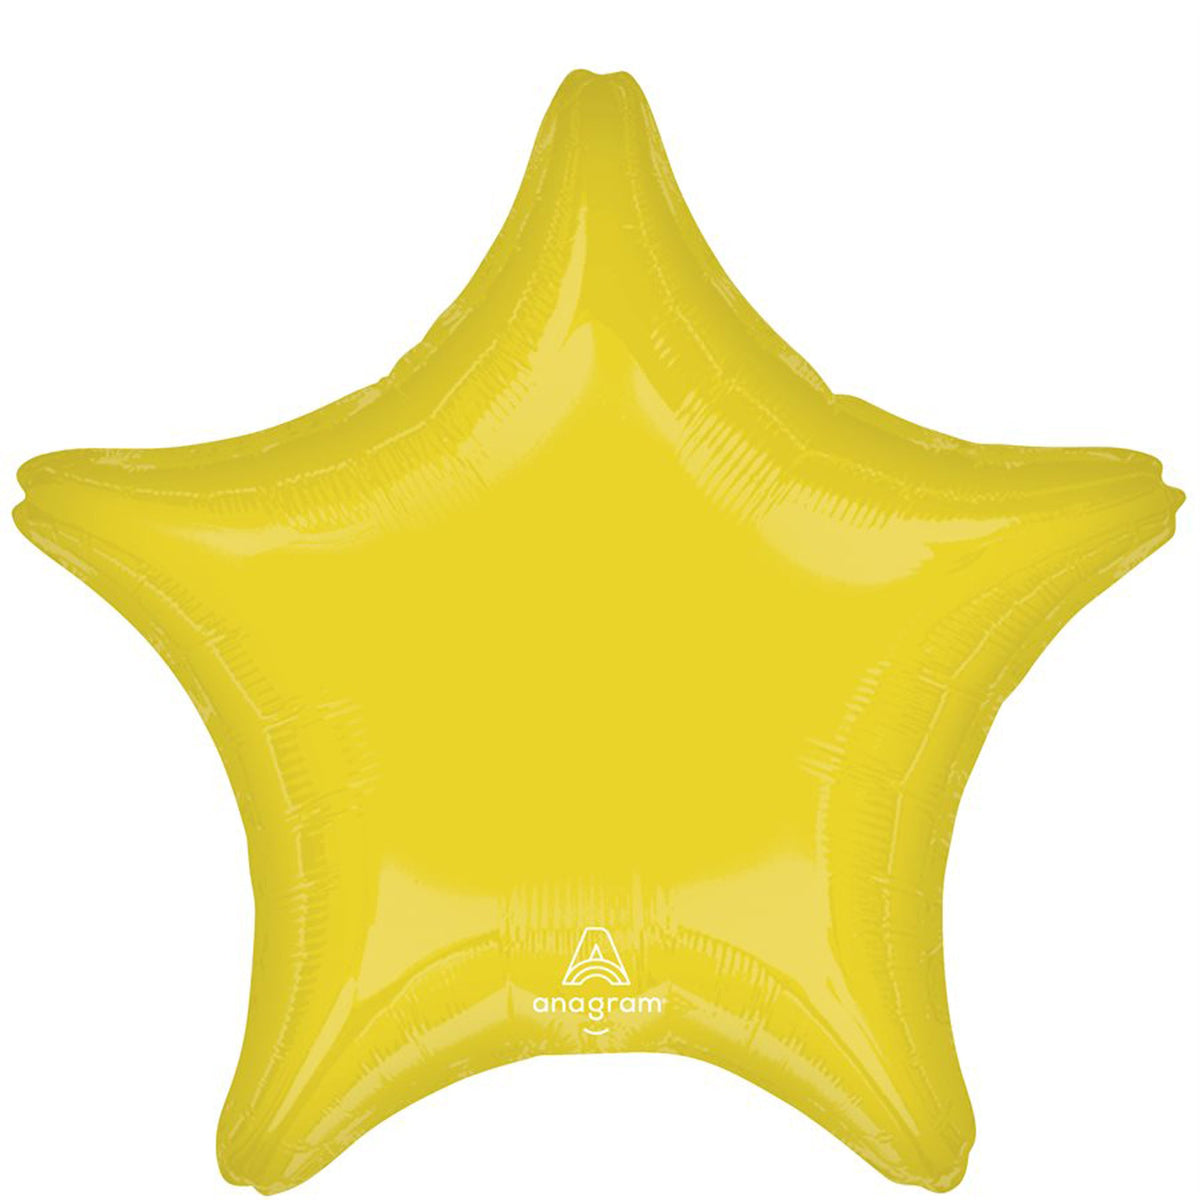 LE GROUPE BLC INTL INC Balloons Vibrant Yellow Star Shaped Balloon, 18 Inches, 1 Count 026635471220